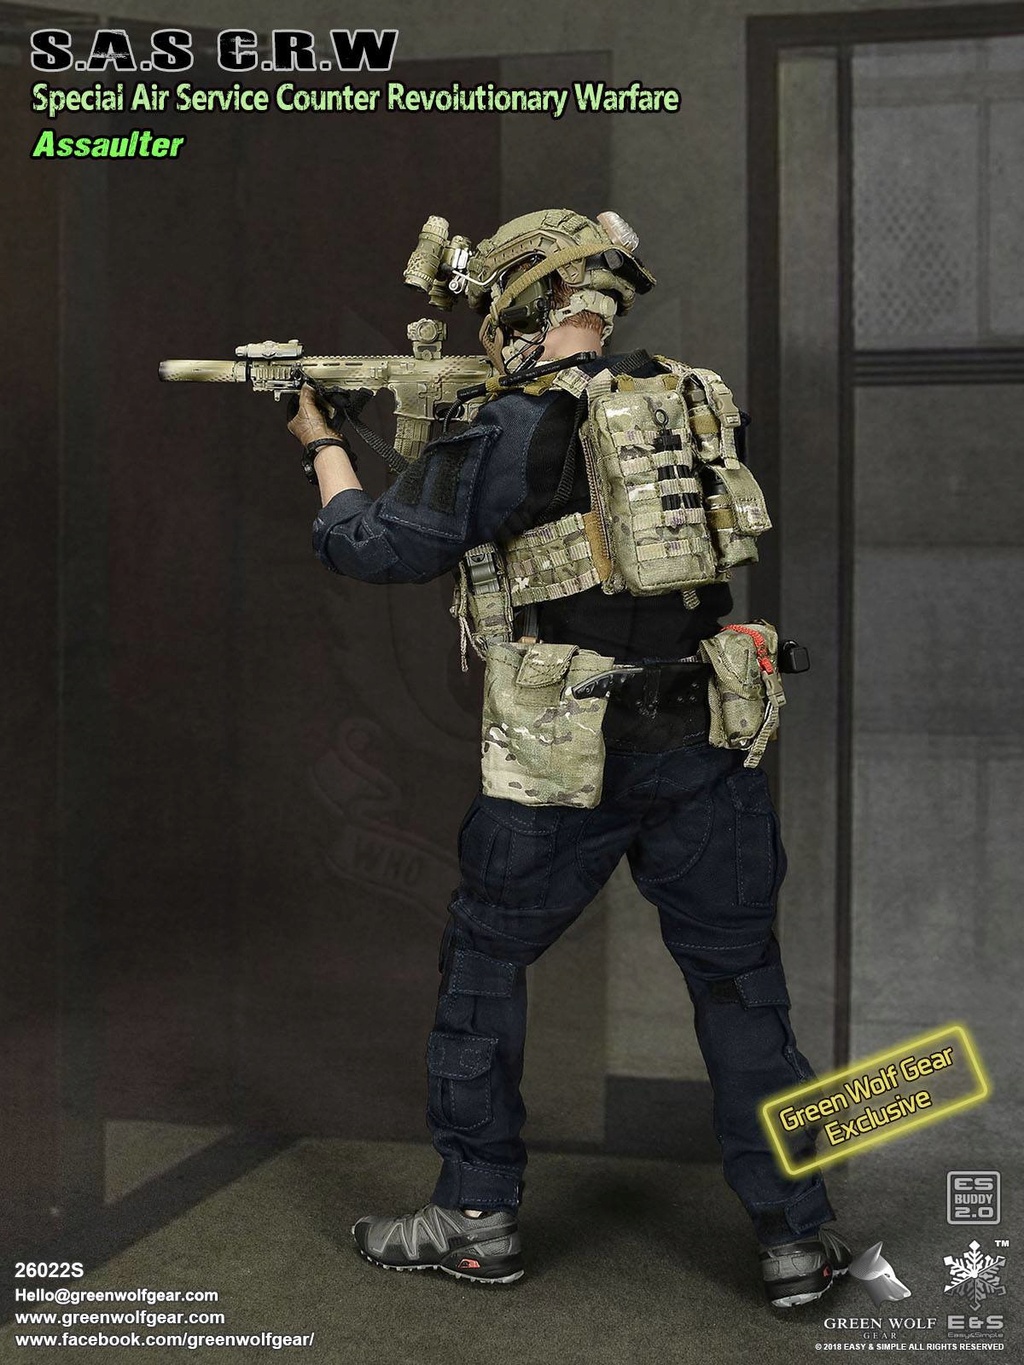 ModernMilitary - NEW PRODUCT: Easy & Simple SAS (Special Air Service) CRW (Counter Revolutionary Warfare)  Assaulter Exclusive Figure 715